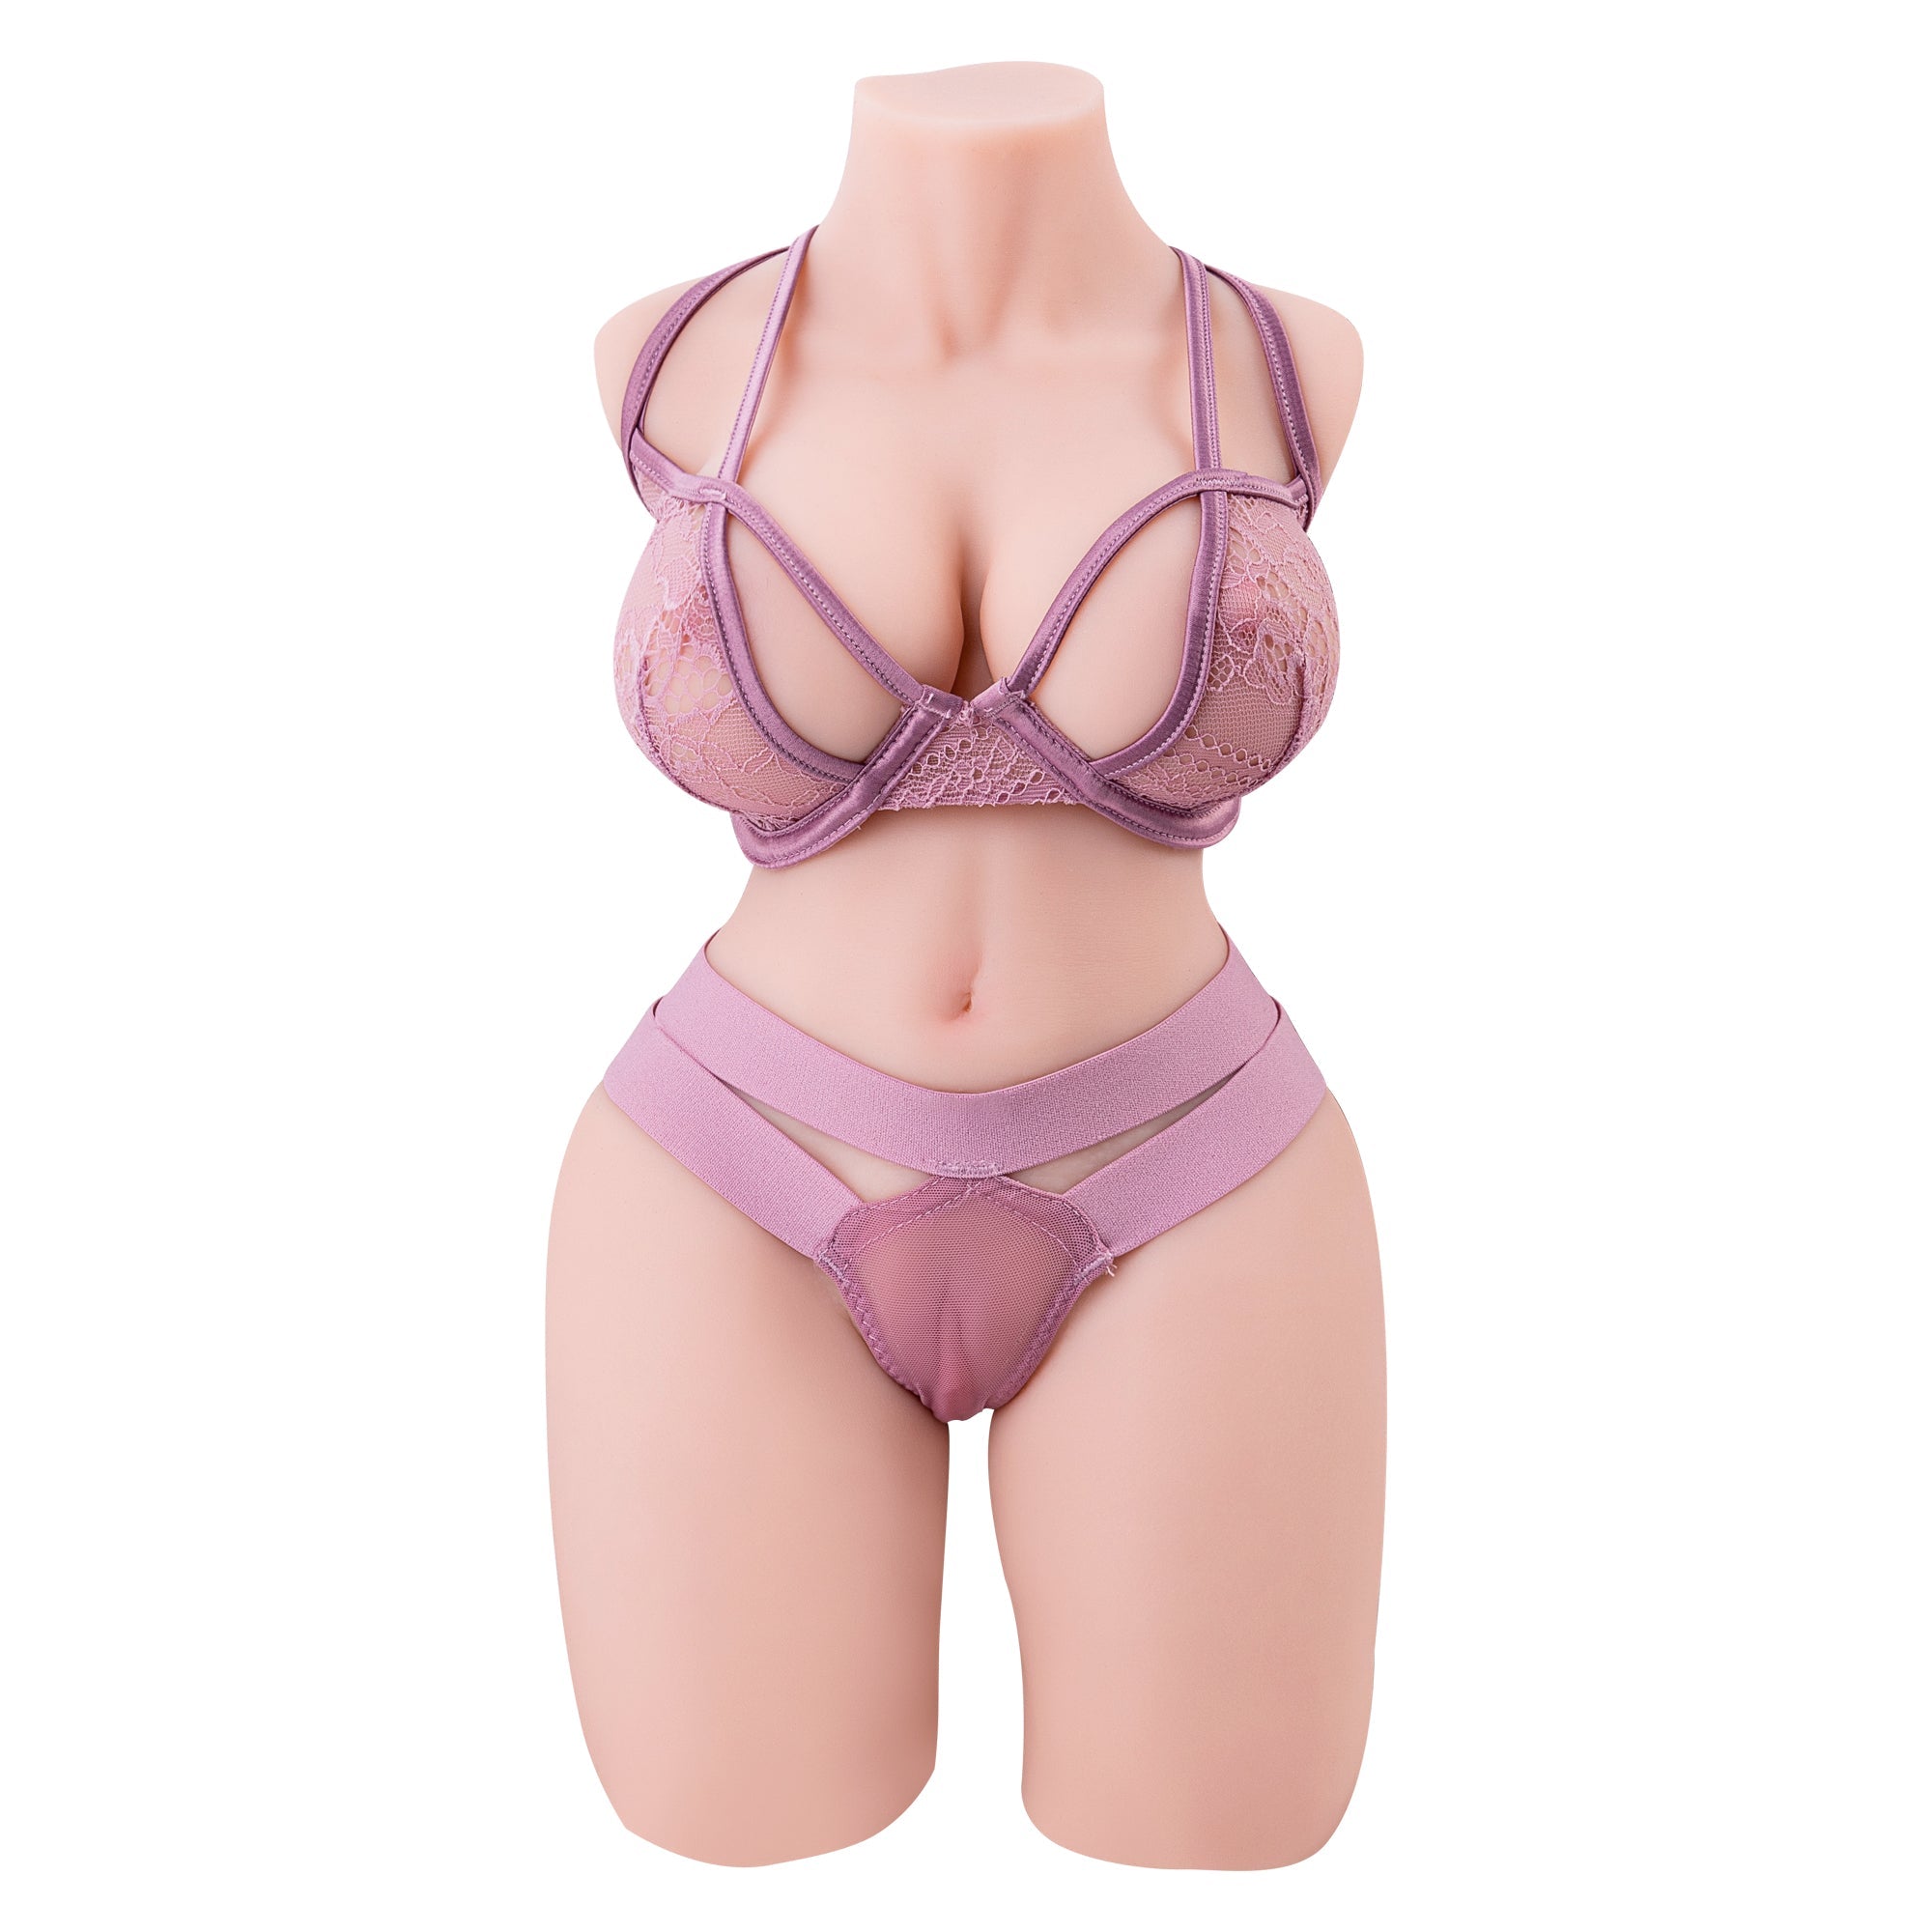 8LB Life Sized Sex Doll for Men, Sexy Female Torso Doll Adult Toys